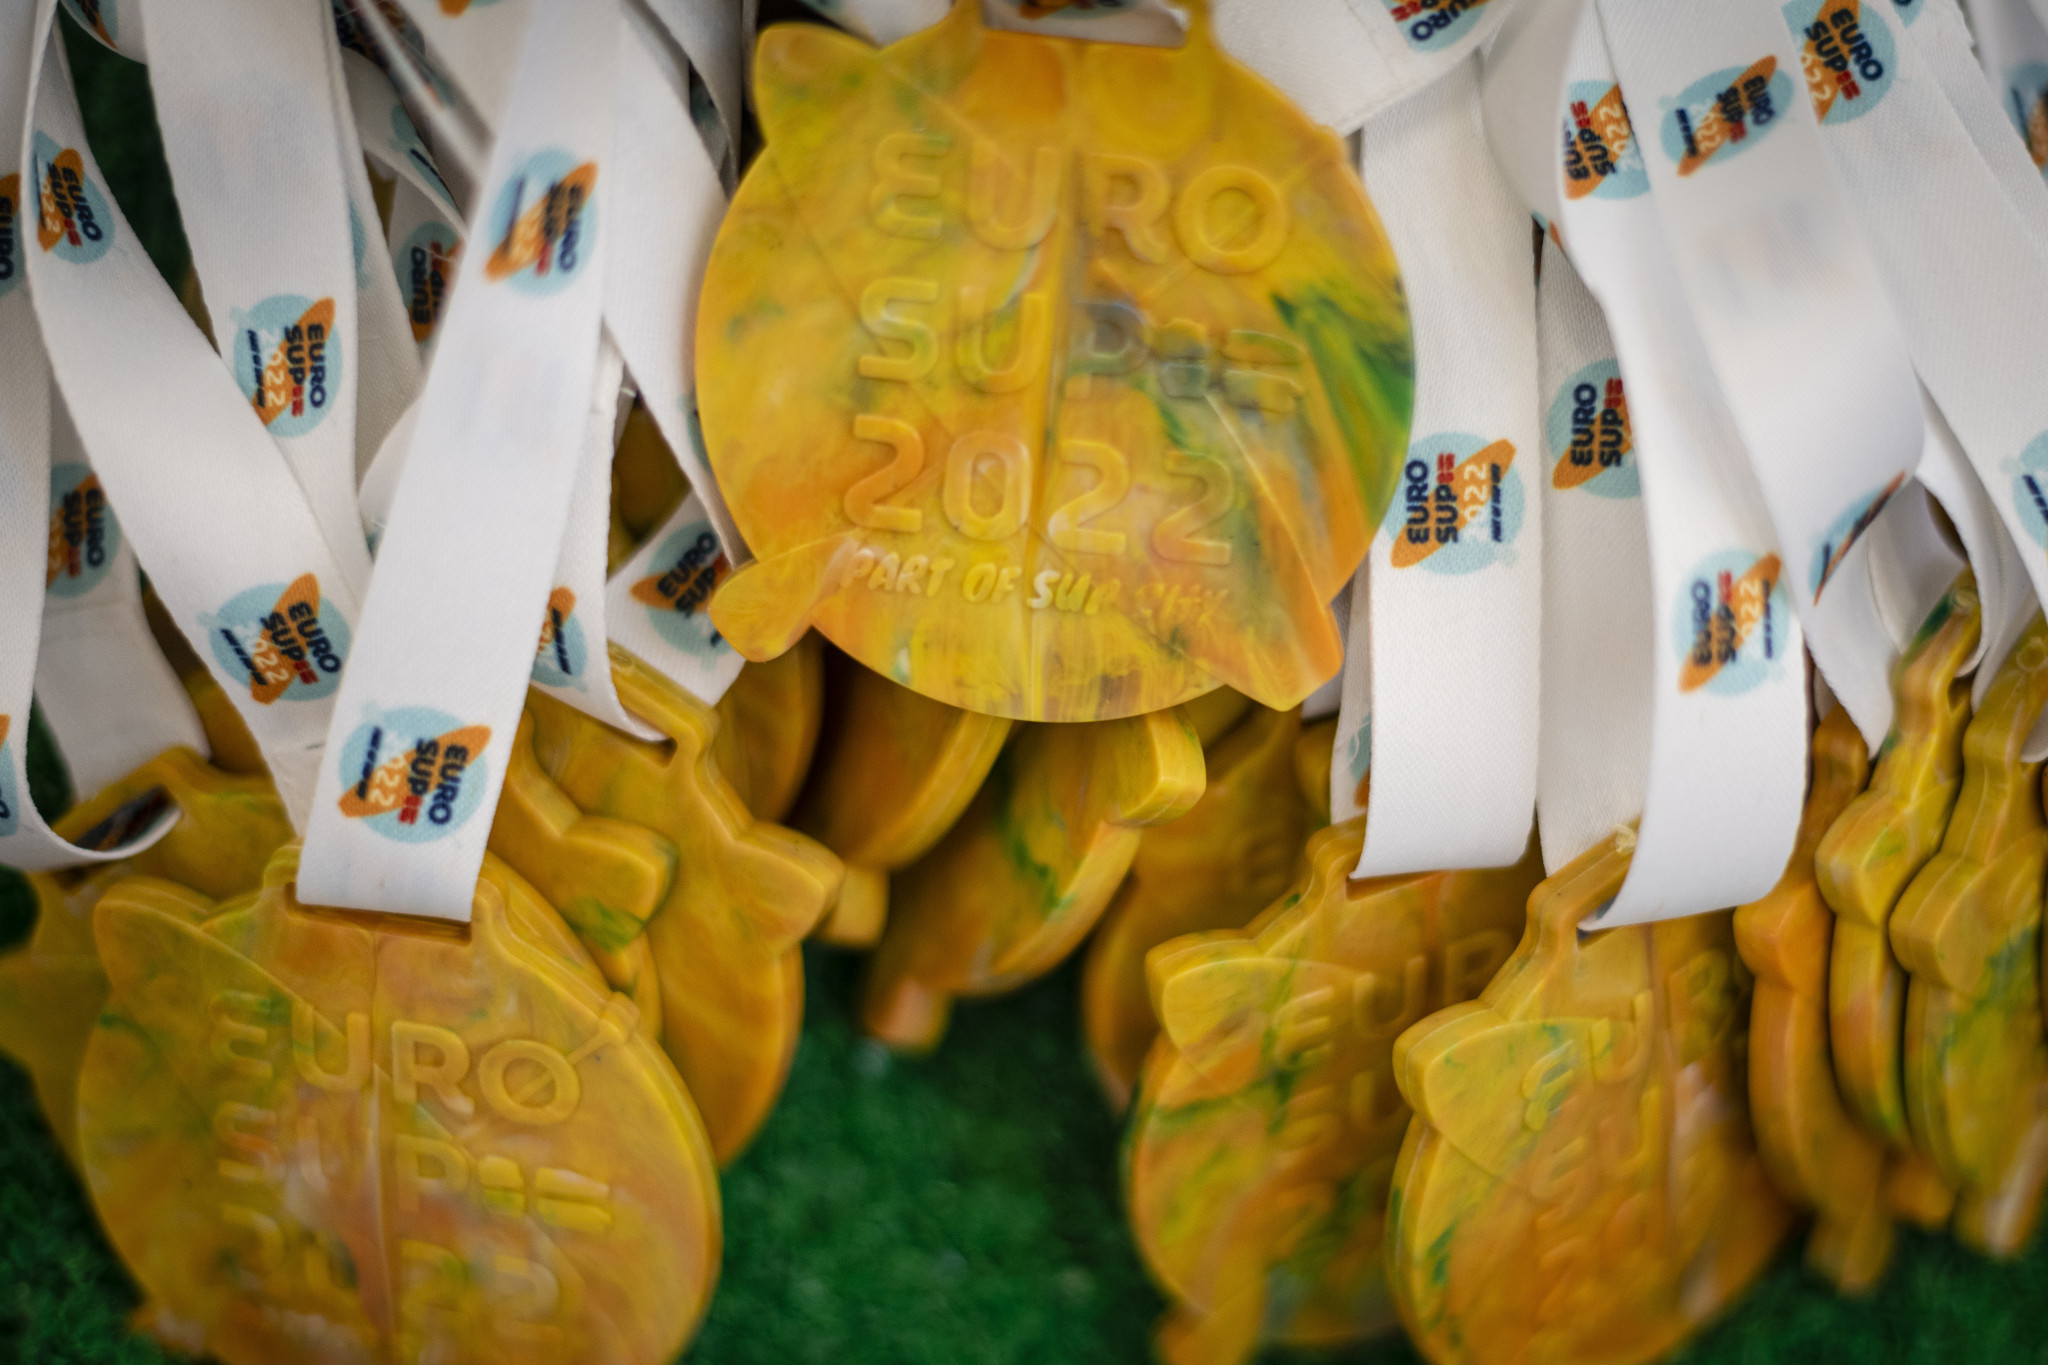 Bespoke gold, silver and bronze medals were created by omhu for last year's European Stand-Up Paddle Championships ©omhu